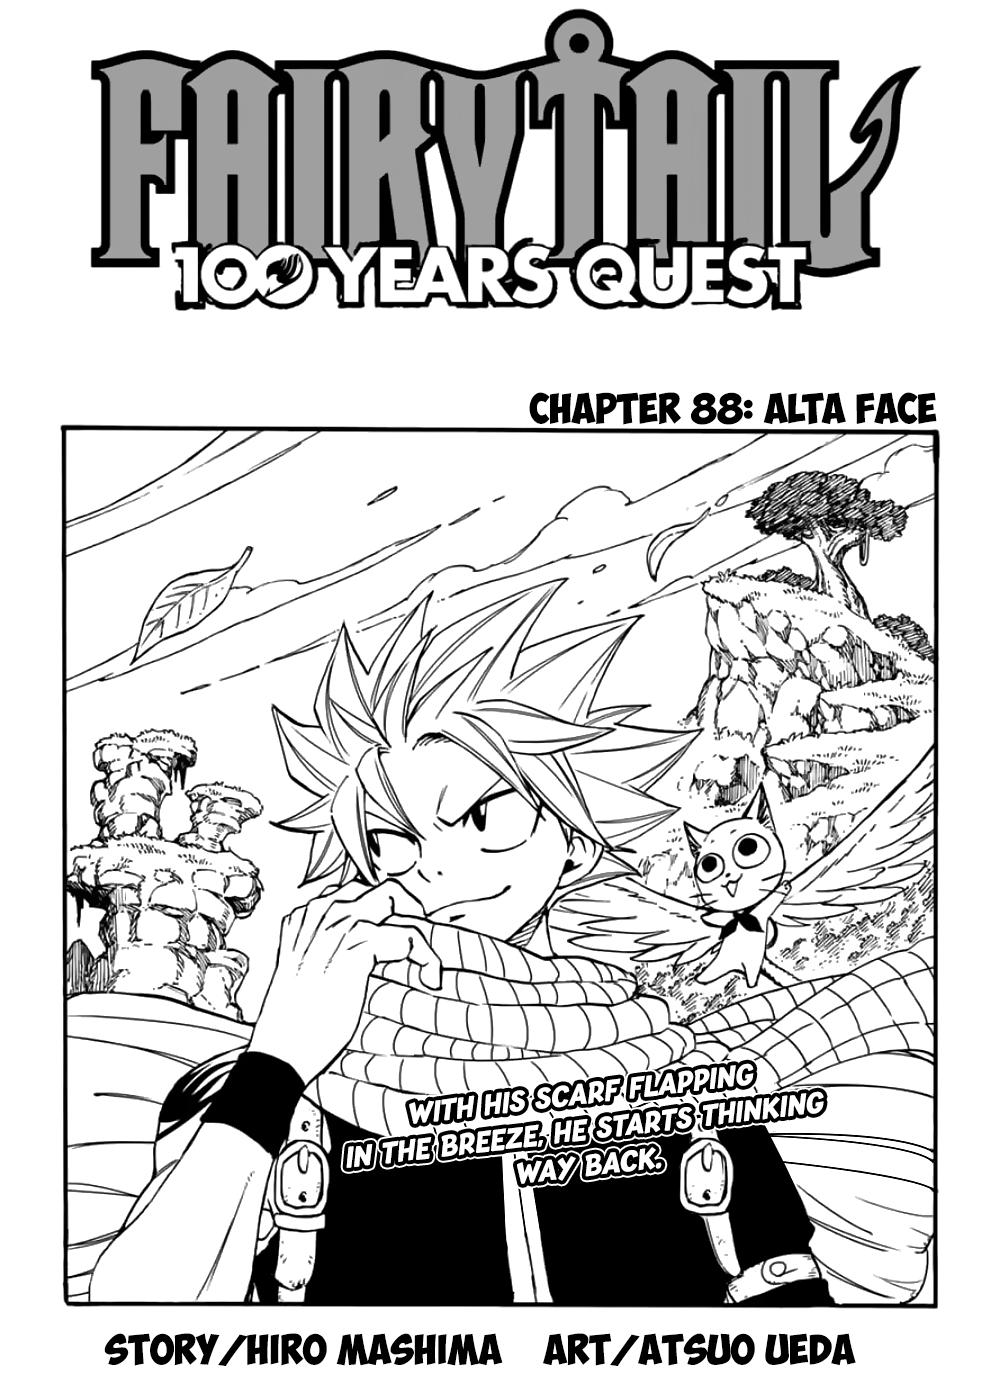 Fairy Tail 100 Years Quest Chapter